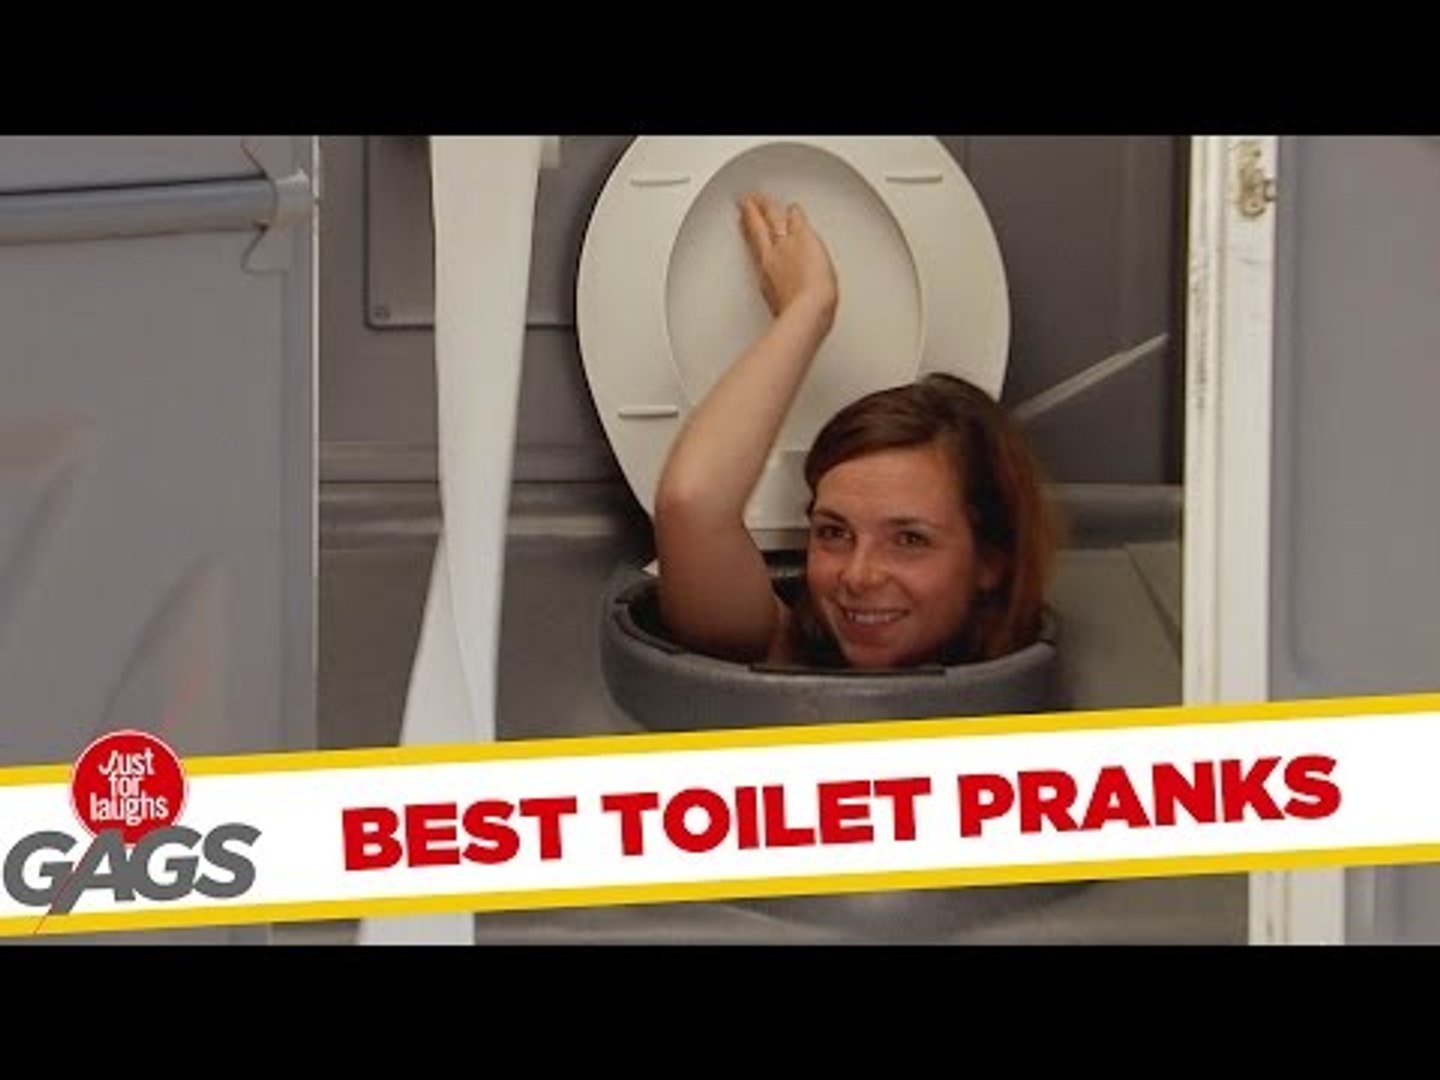 Best Public Toilet Pranks - Best of Just for Laughs Gags